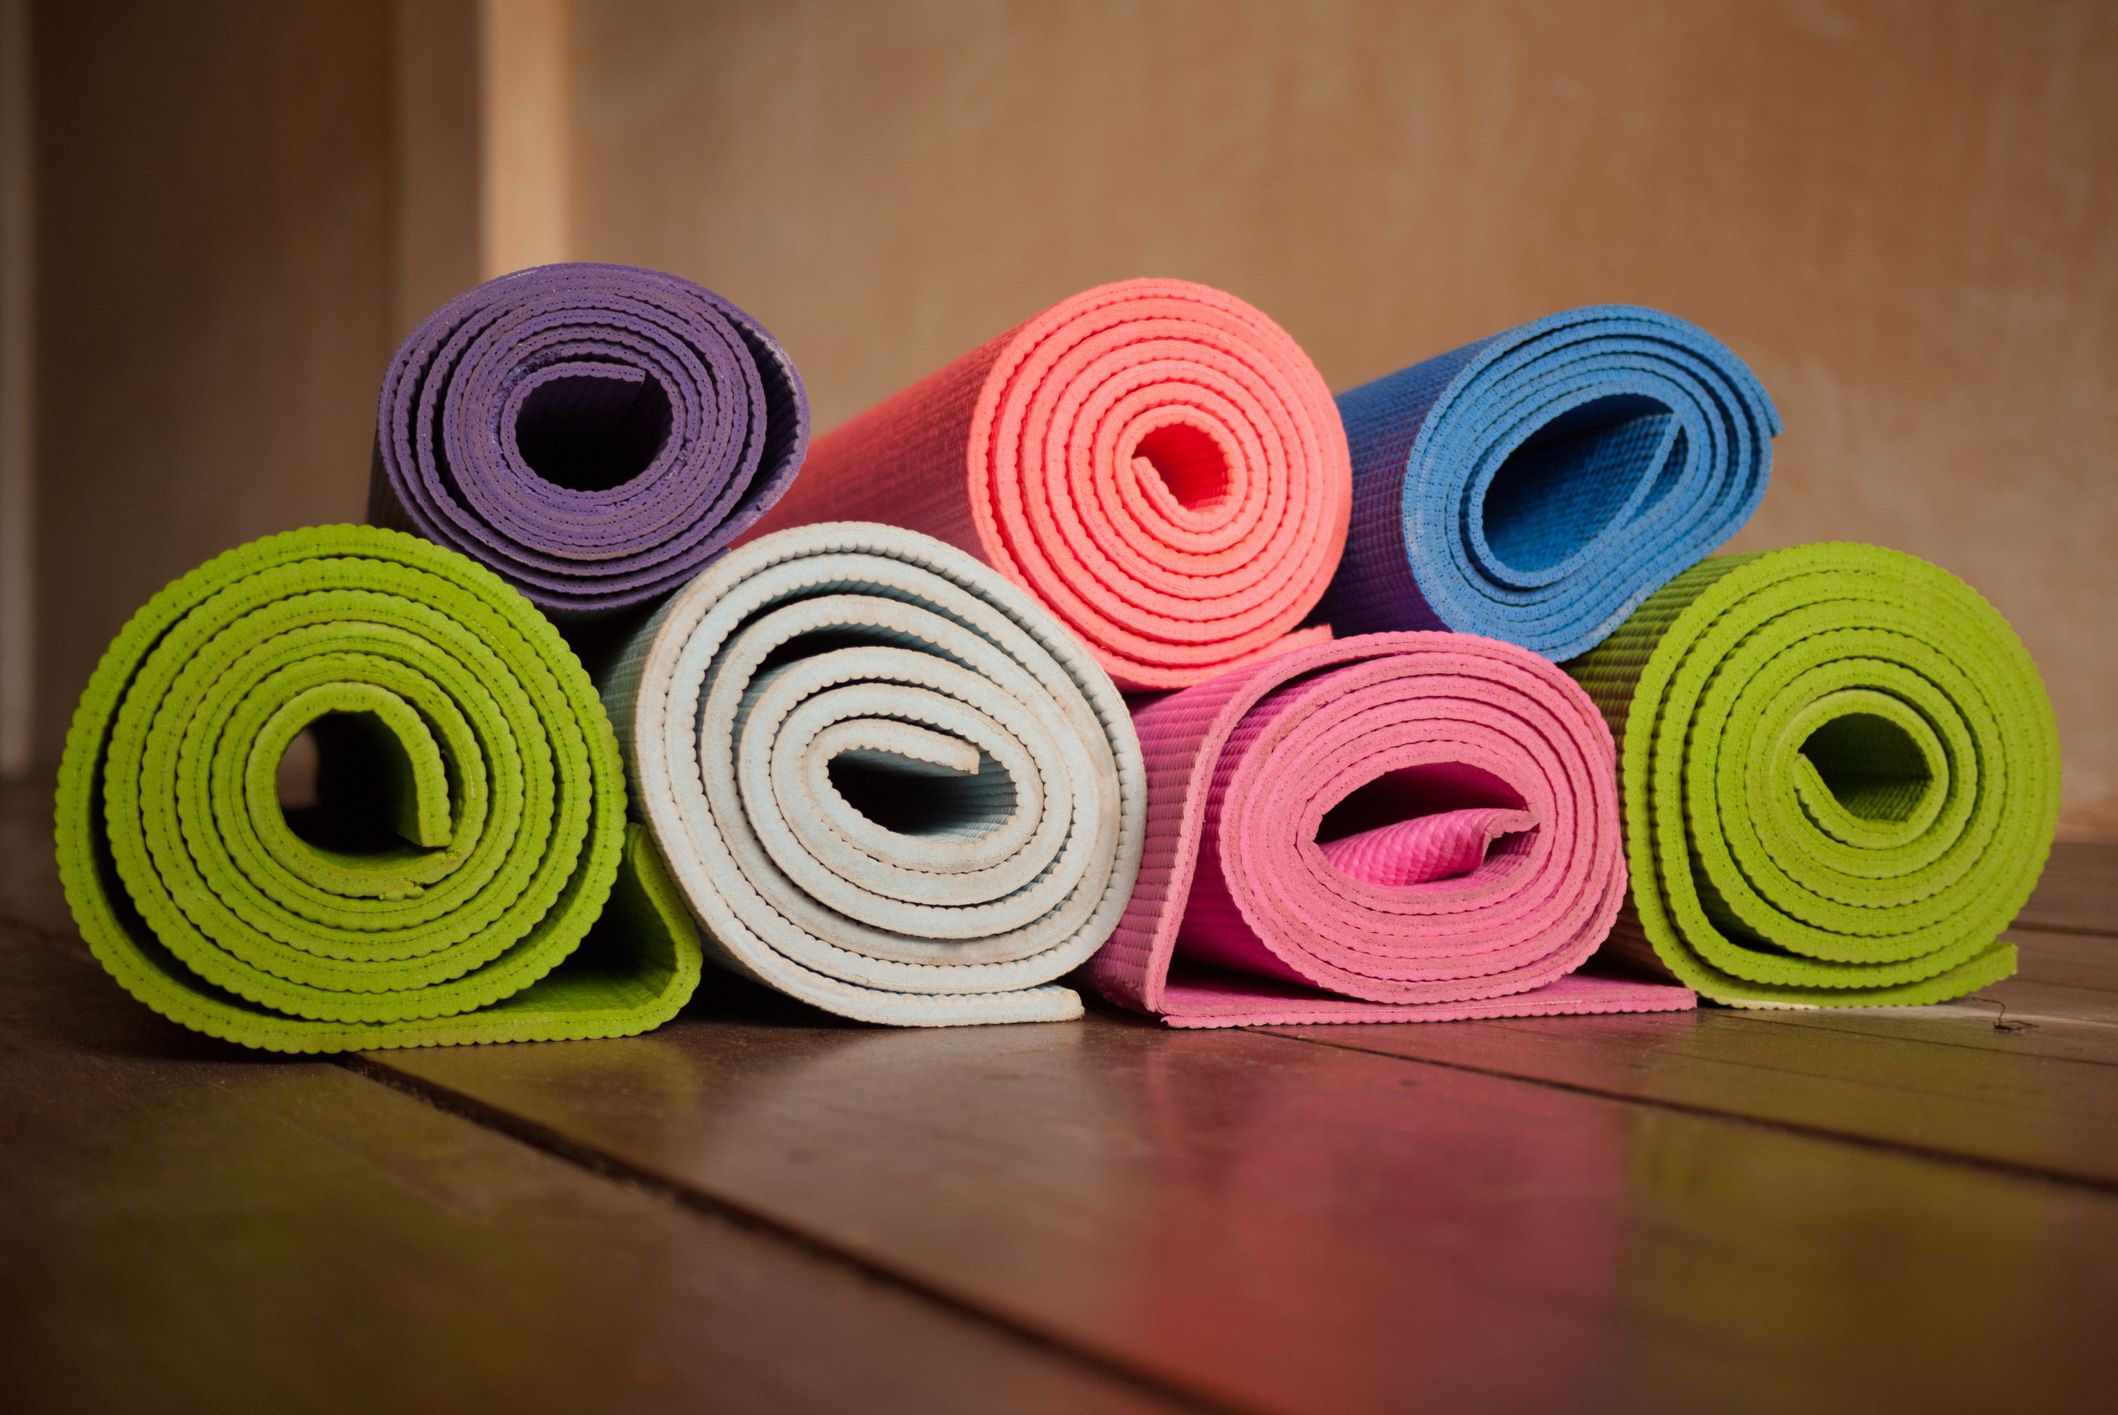 7 Non-toxic and Sustainable Yoga Mat Options That Are Responsibly